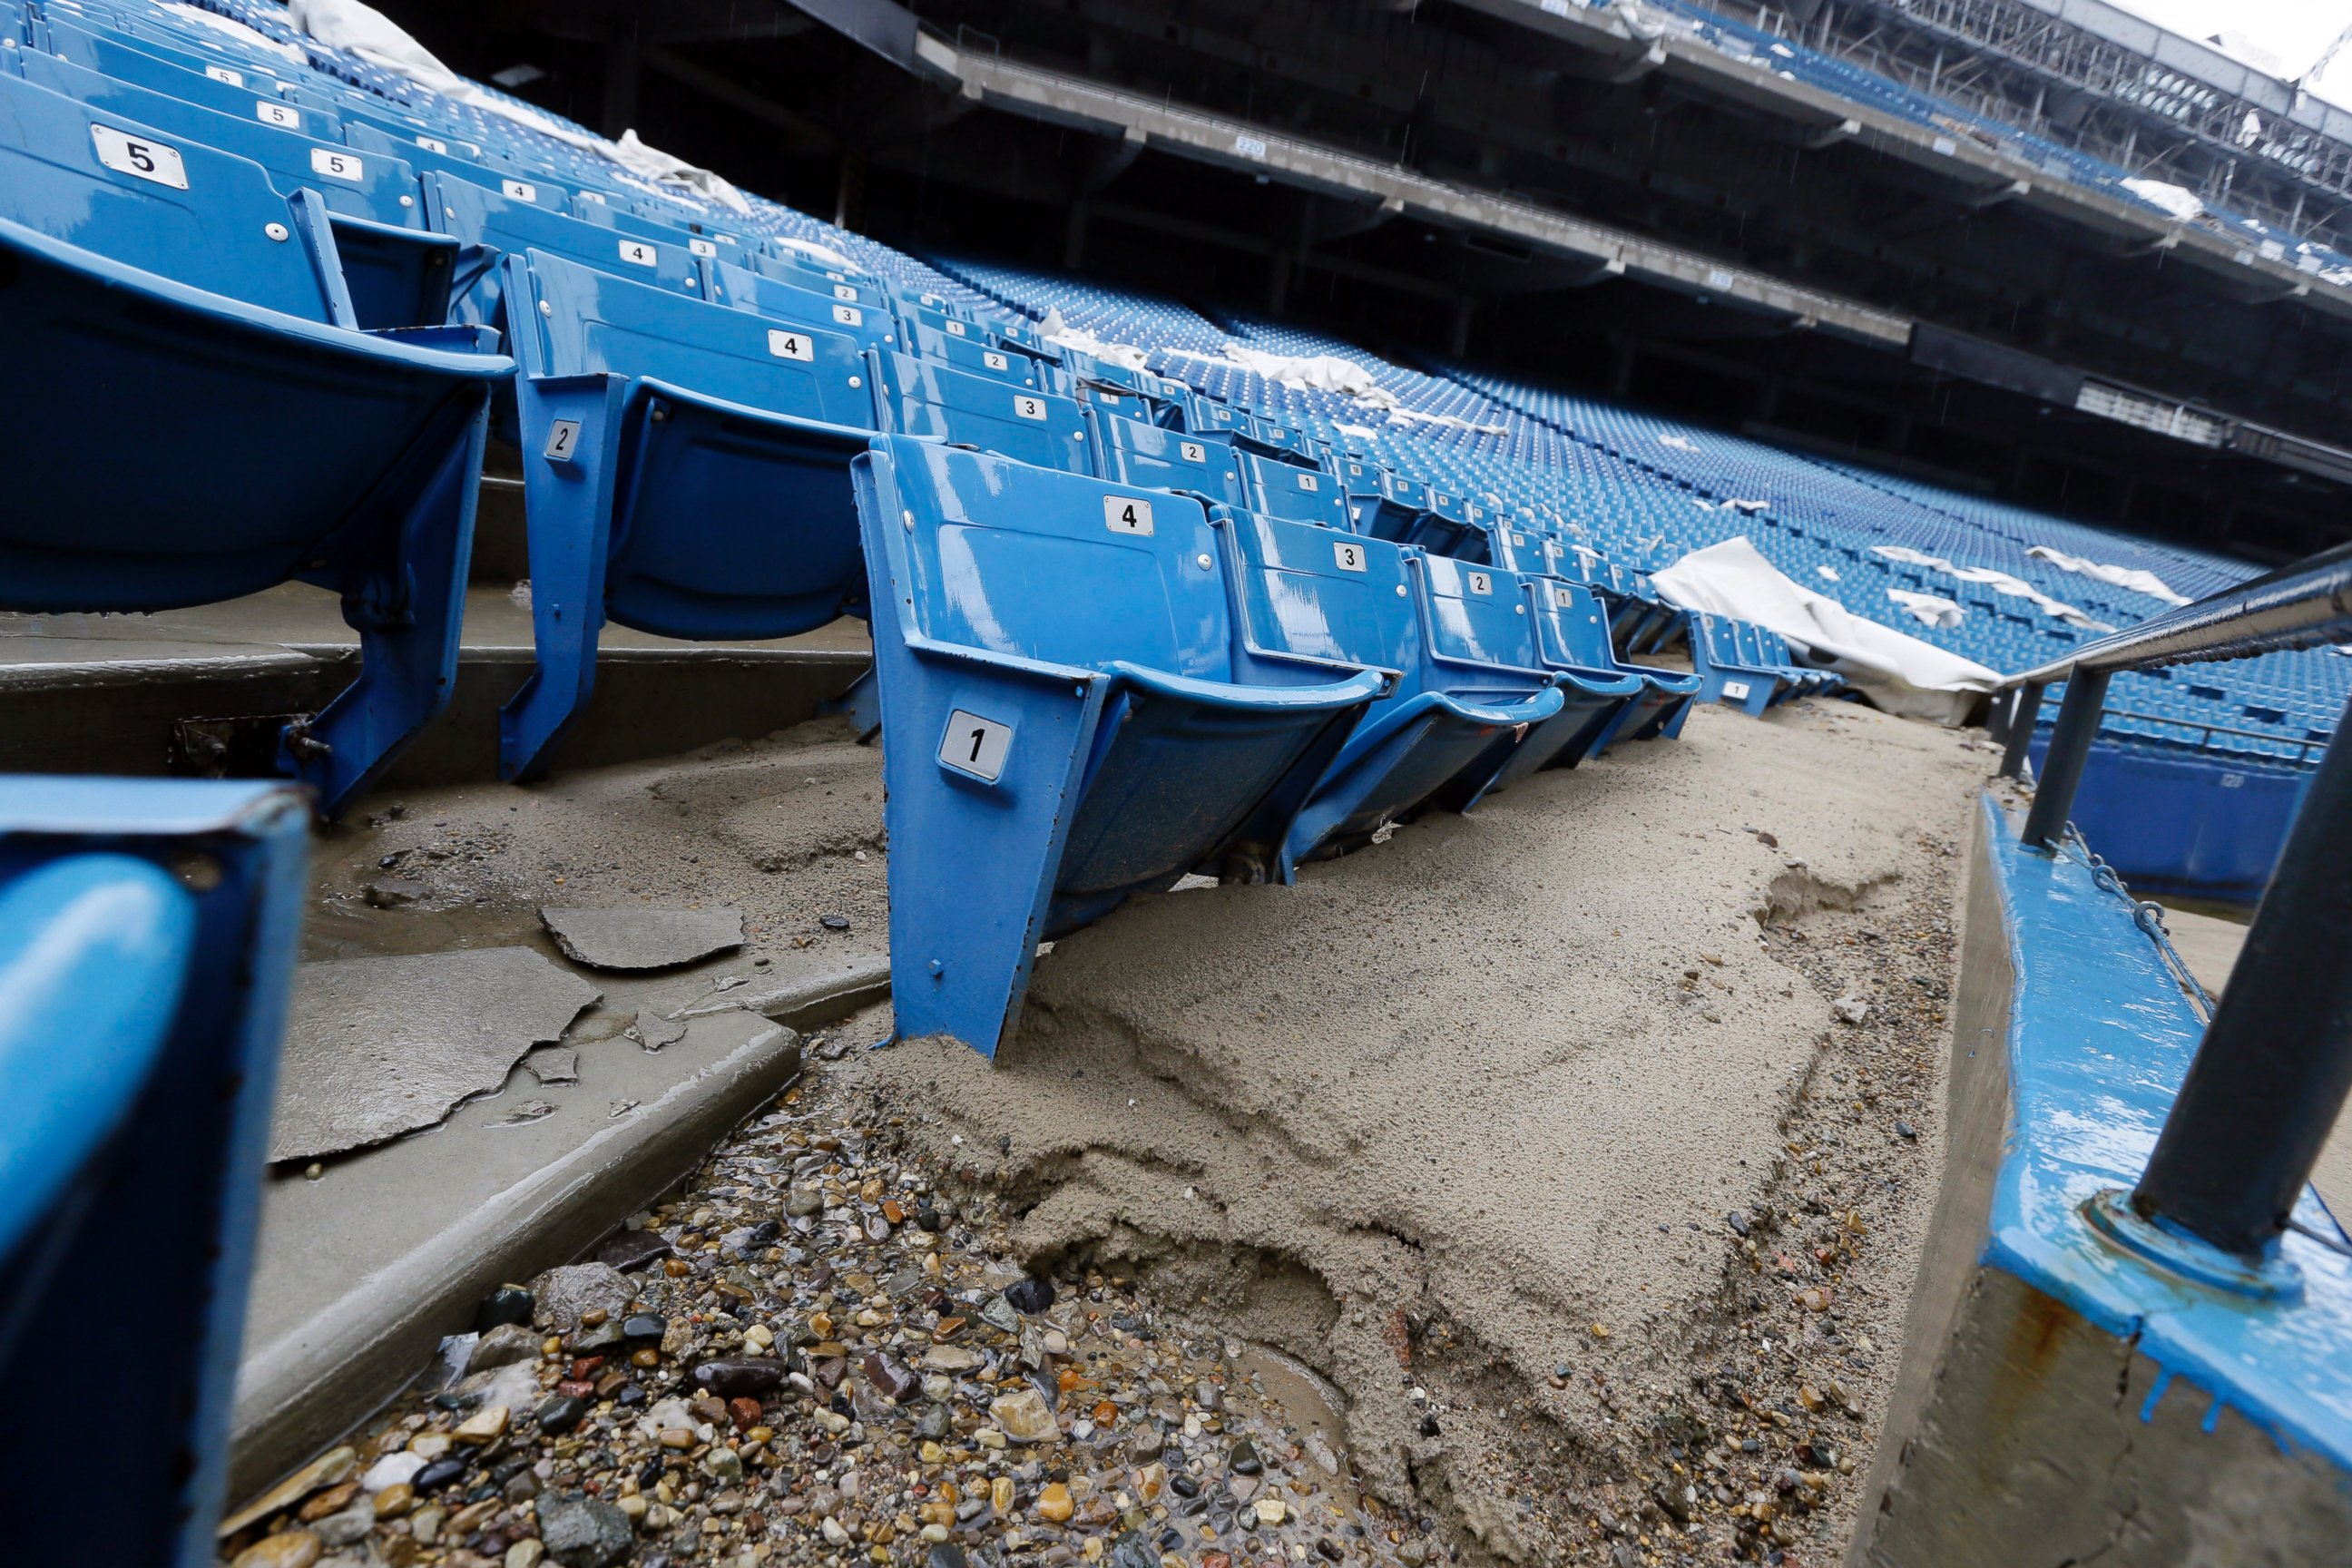 PHOTO: Foundation sand from cracked cement covers seats inside the Pontiac Silverdome in Pontiac, Mich. in this May 12, 2014 photo.